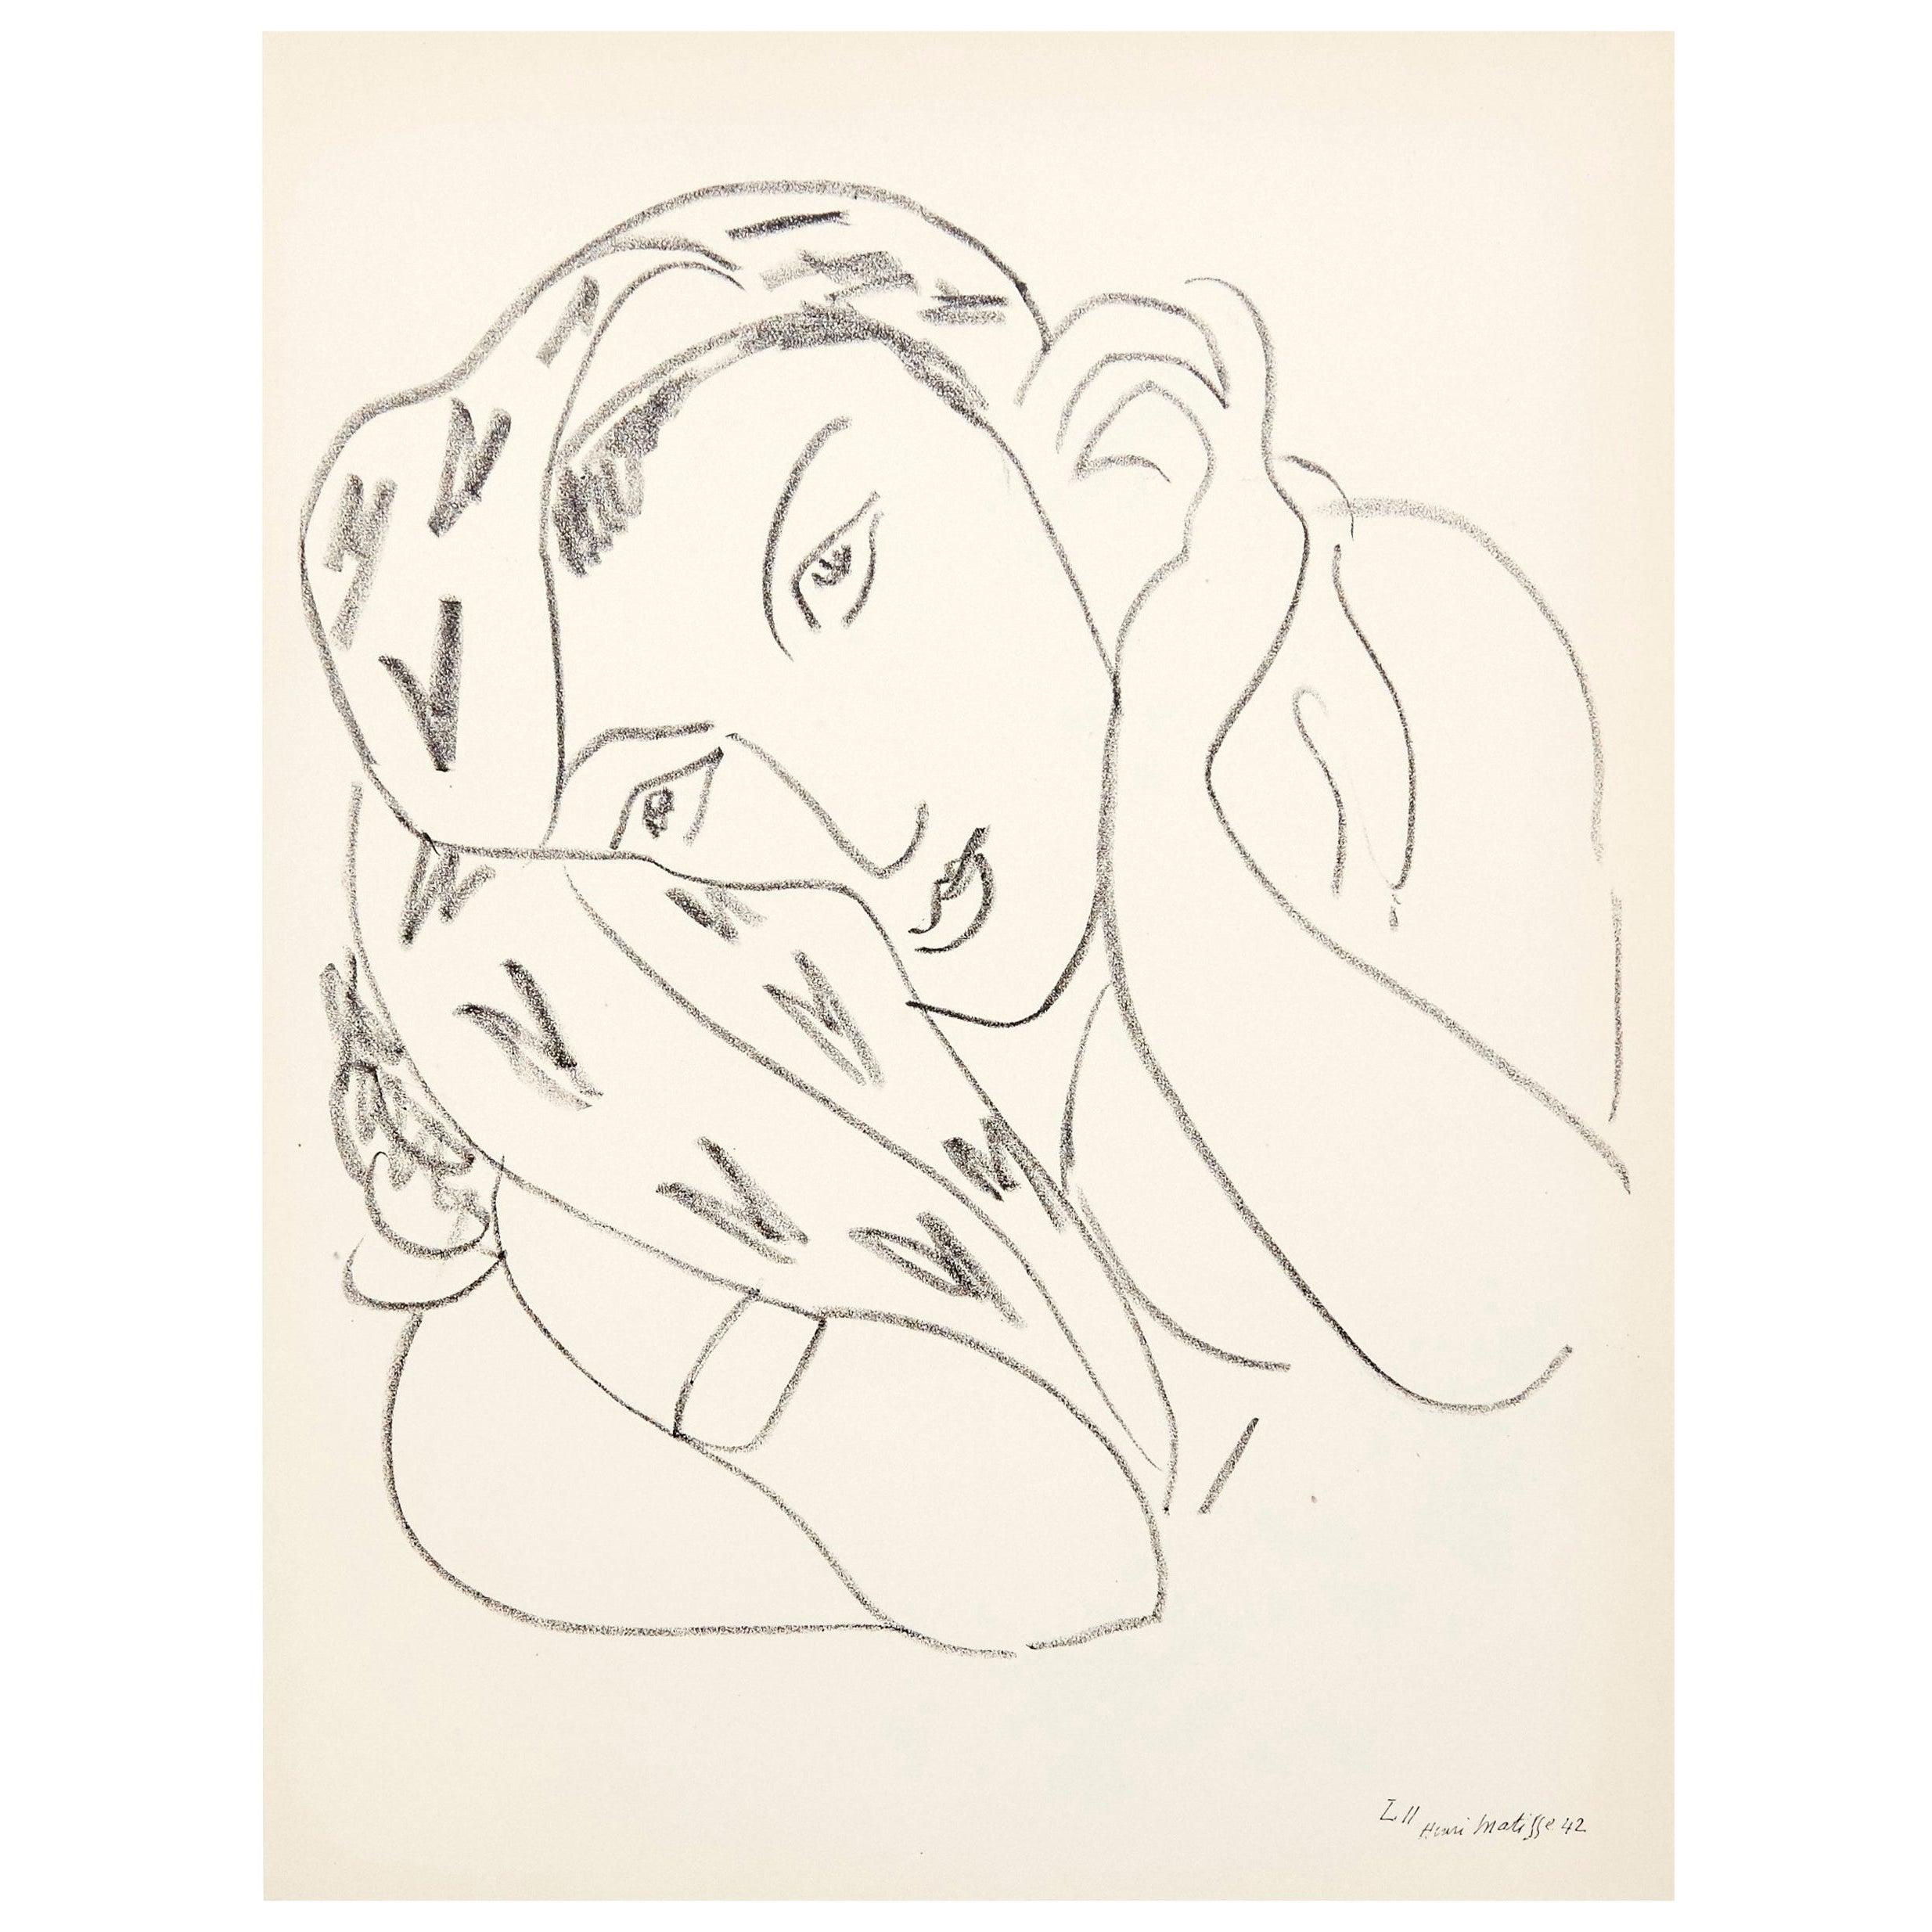 Portrait Lithograph in Paper after Original Matisse Drawing